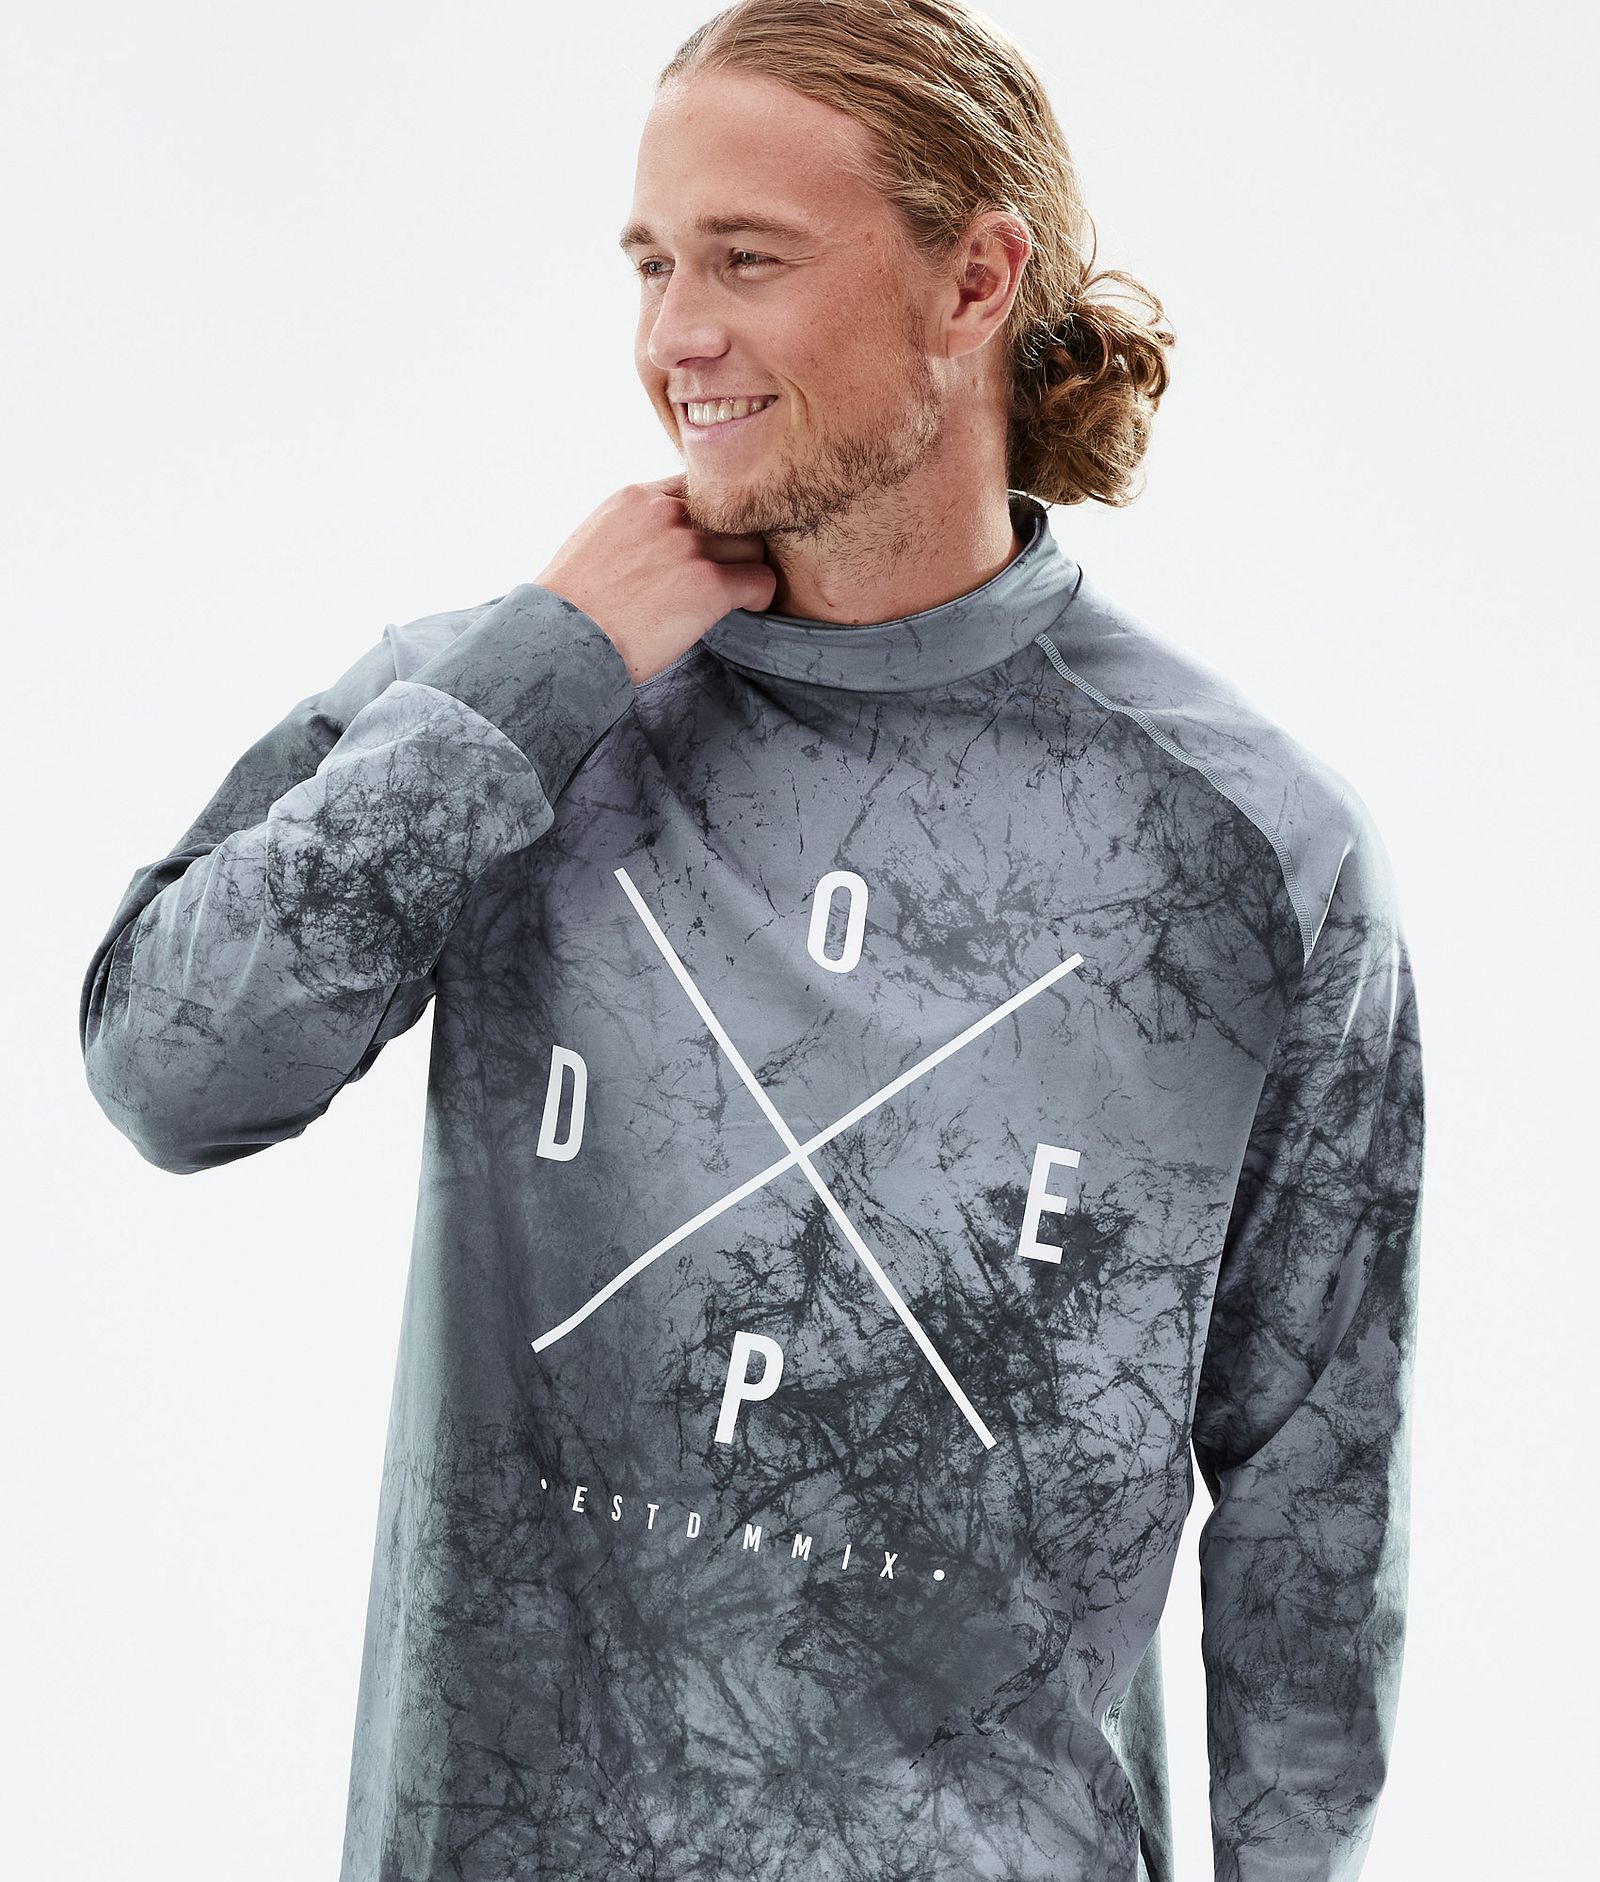 Dope Snuggle 2022 Base Layer Top Men 2X-Up Dirt, Image 2 of 5